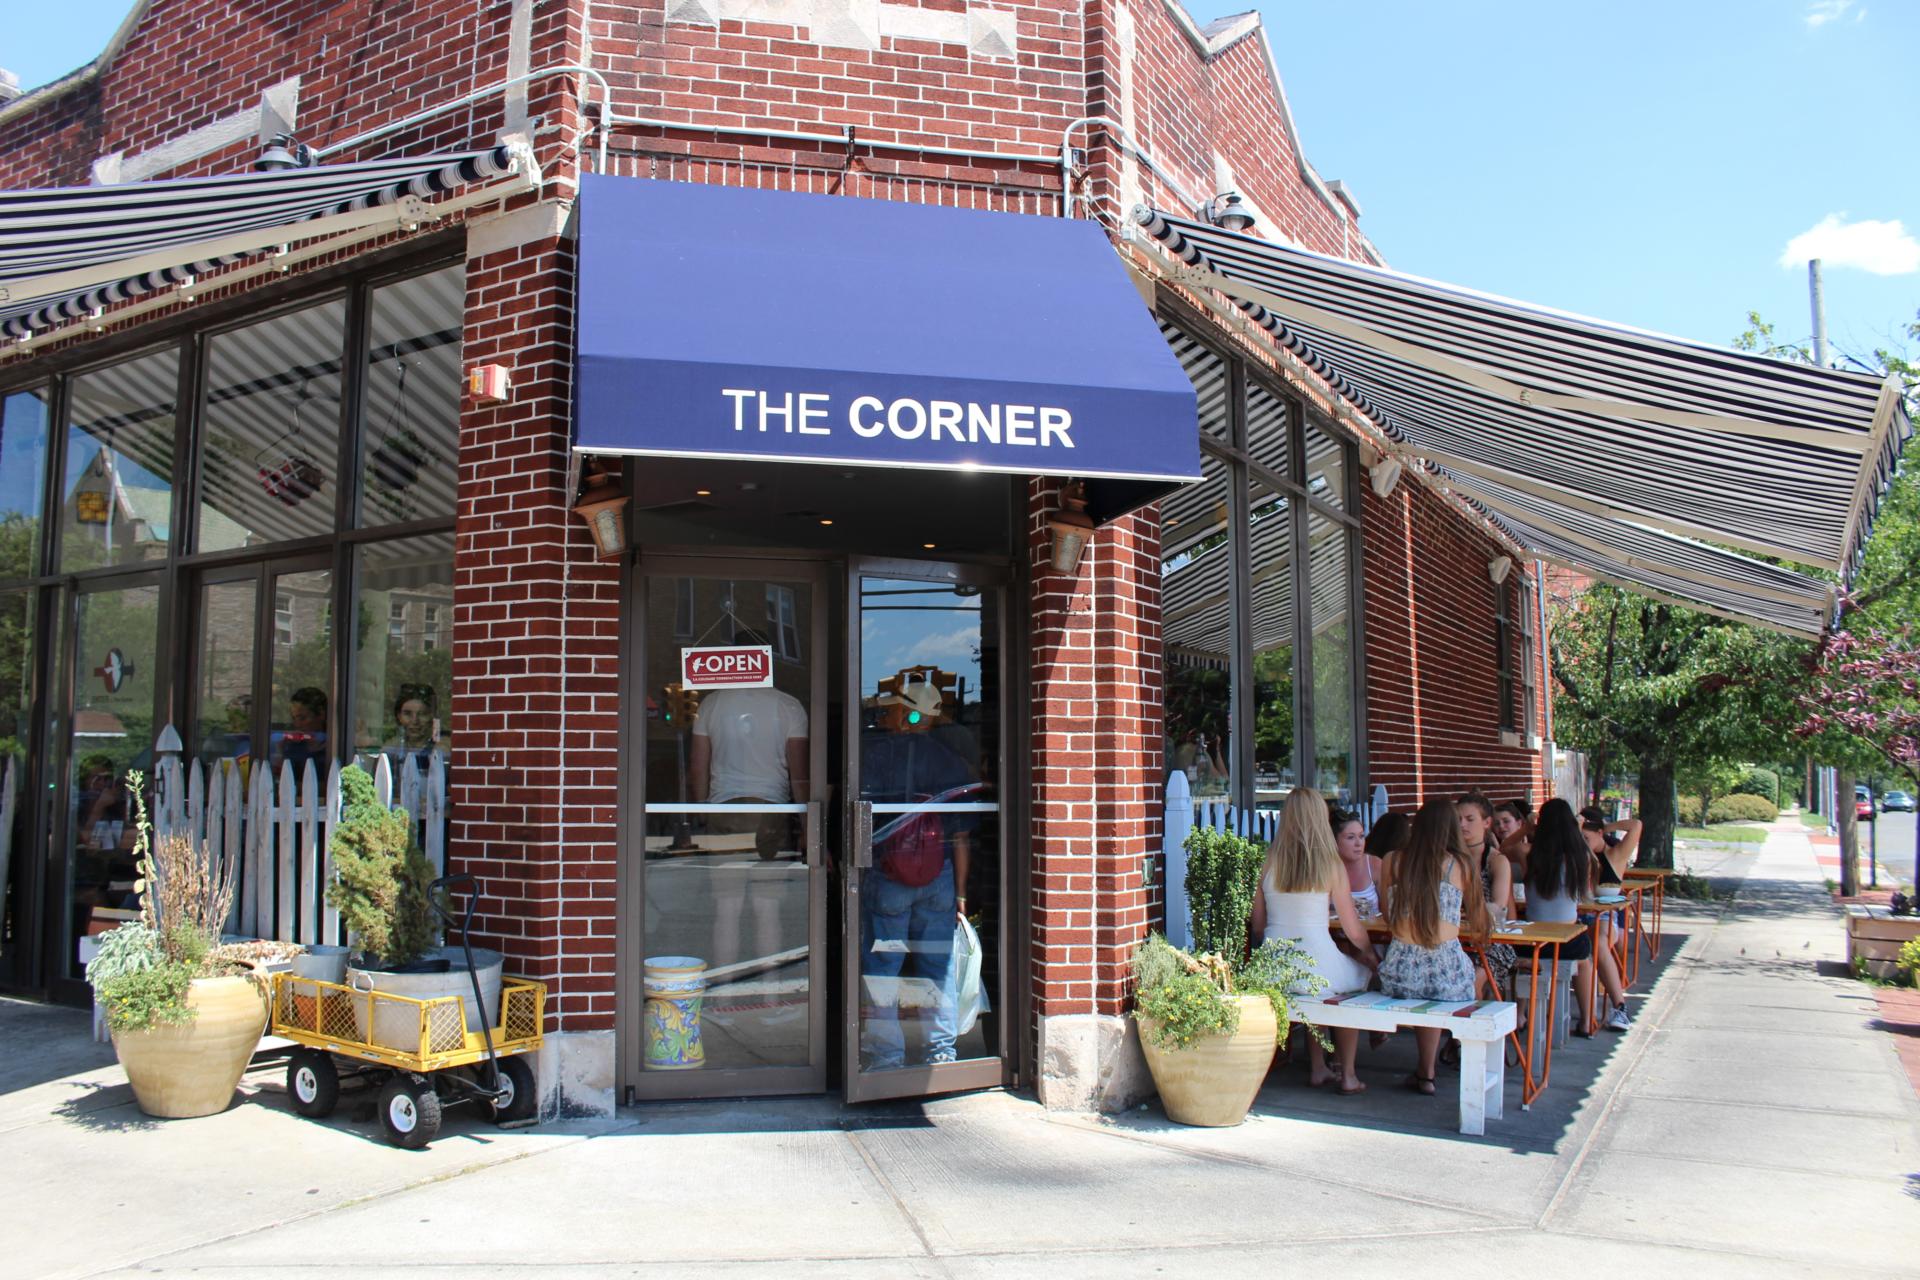 LOCAL: Sunday Brunch at The Corner